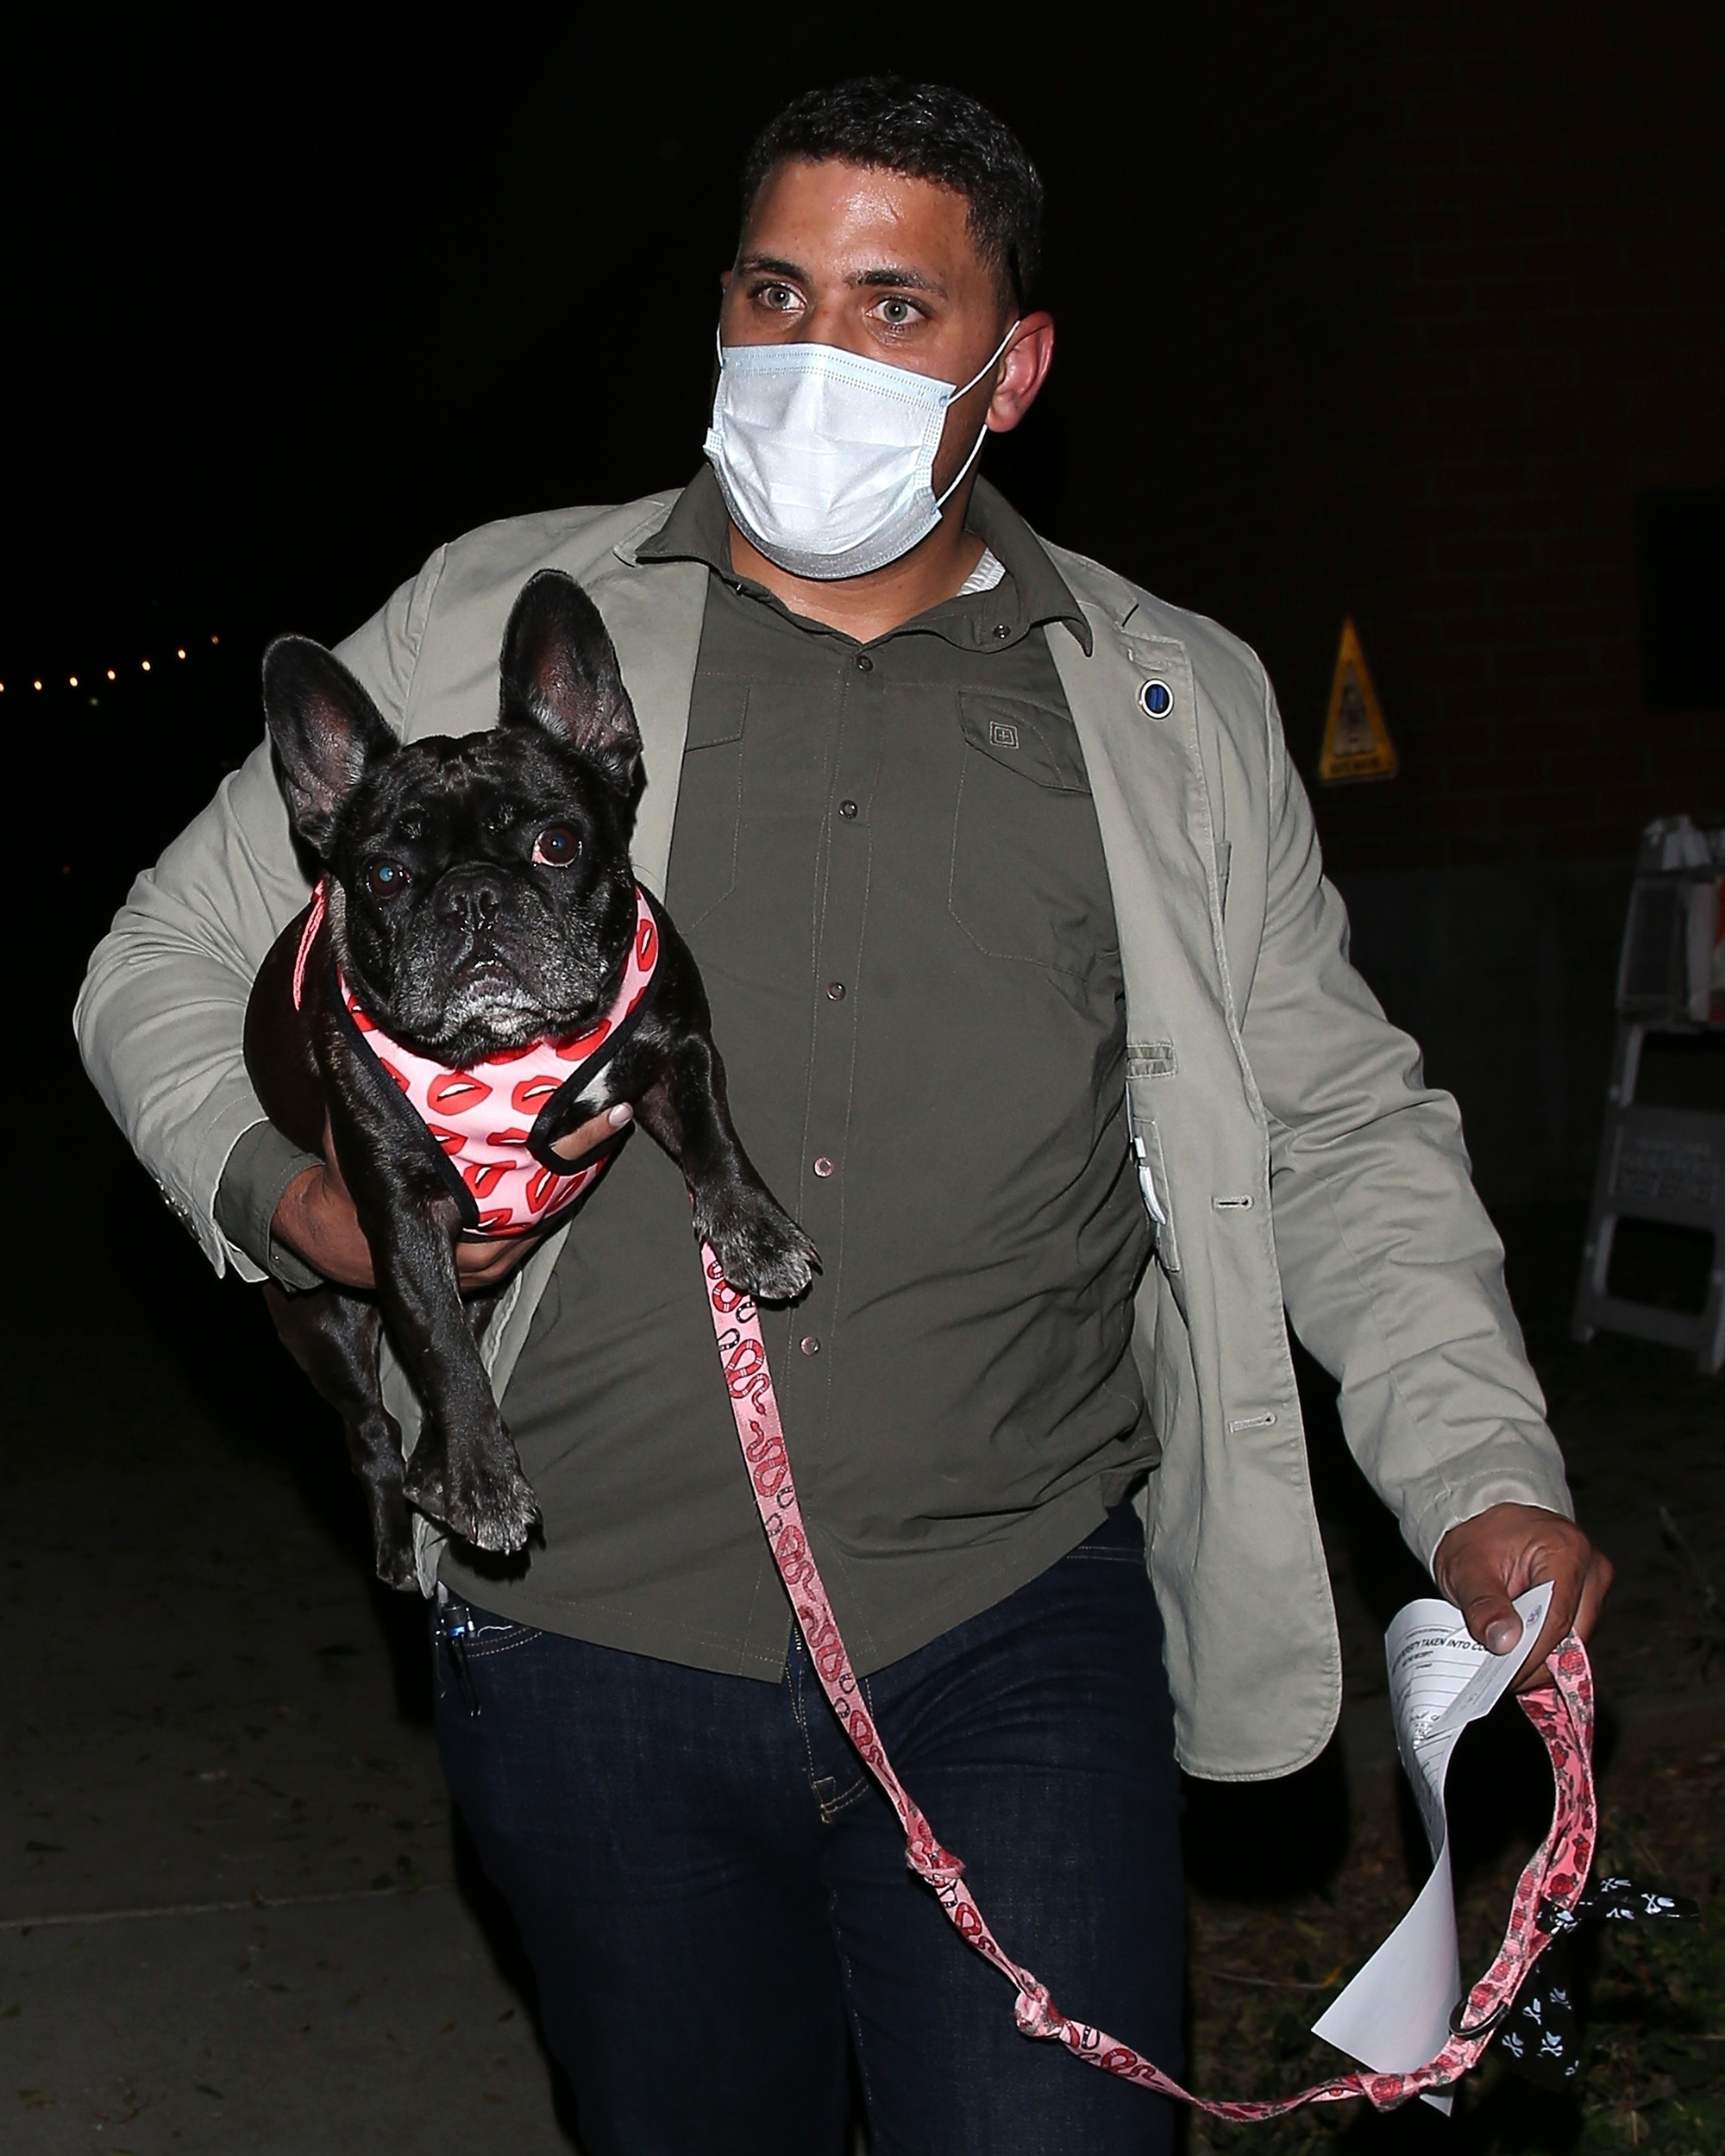 Lady Gaga's dog is picked up by her bodyguard at the Hollywood LAPD Station on Feb. 25, 2021.